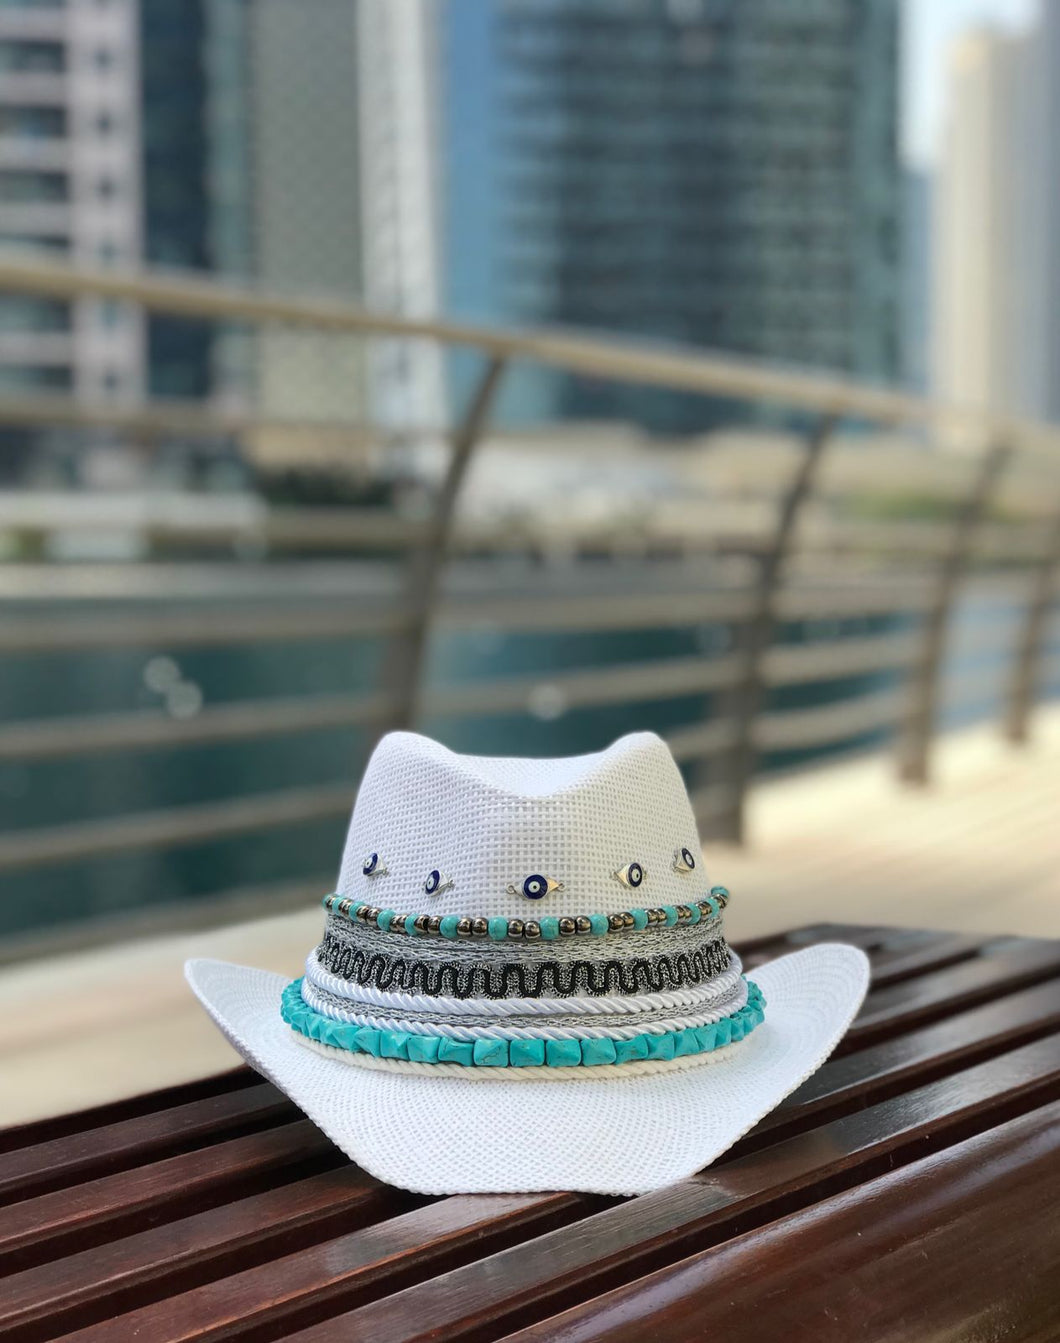 White cowboy hat with small eyes